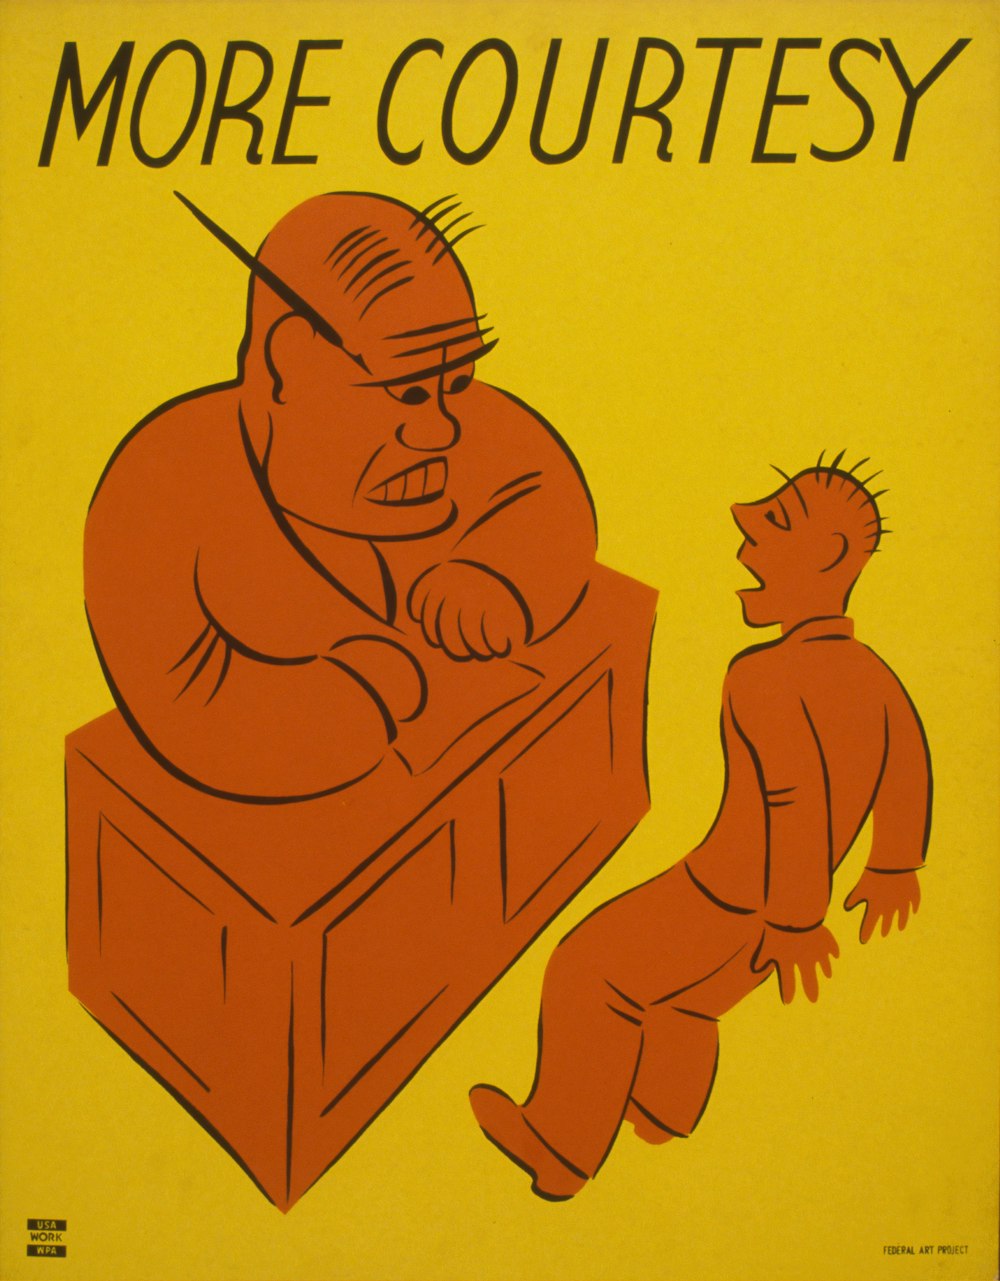 More Courtesy. WPA poster.